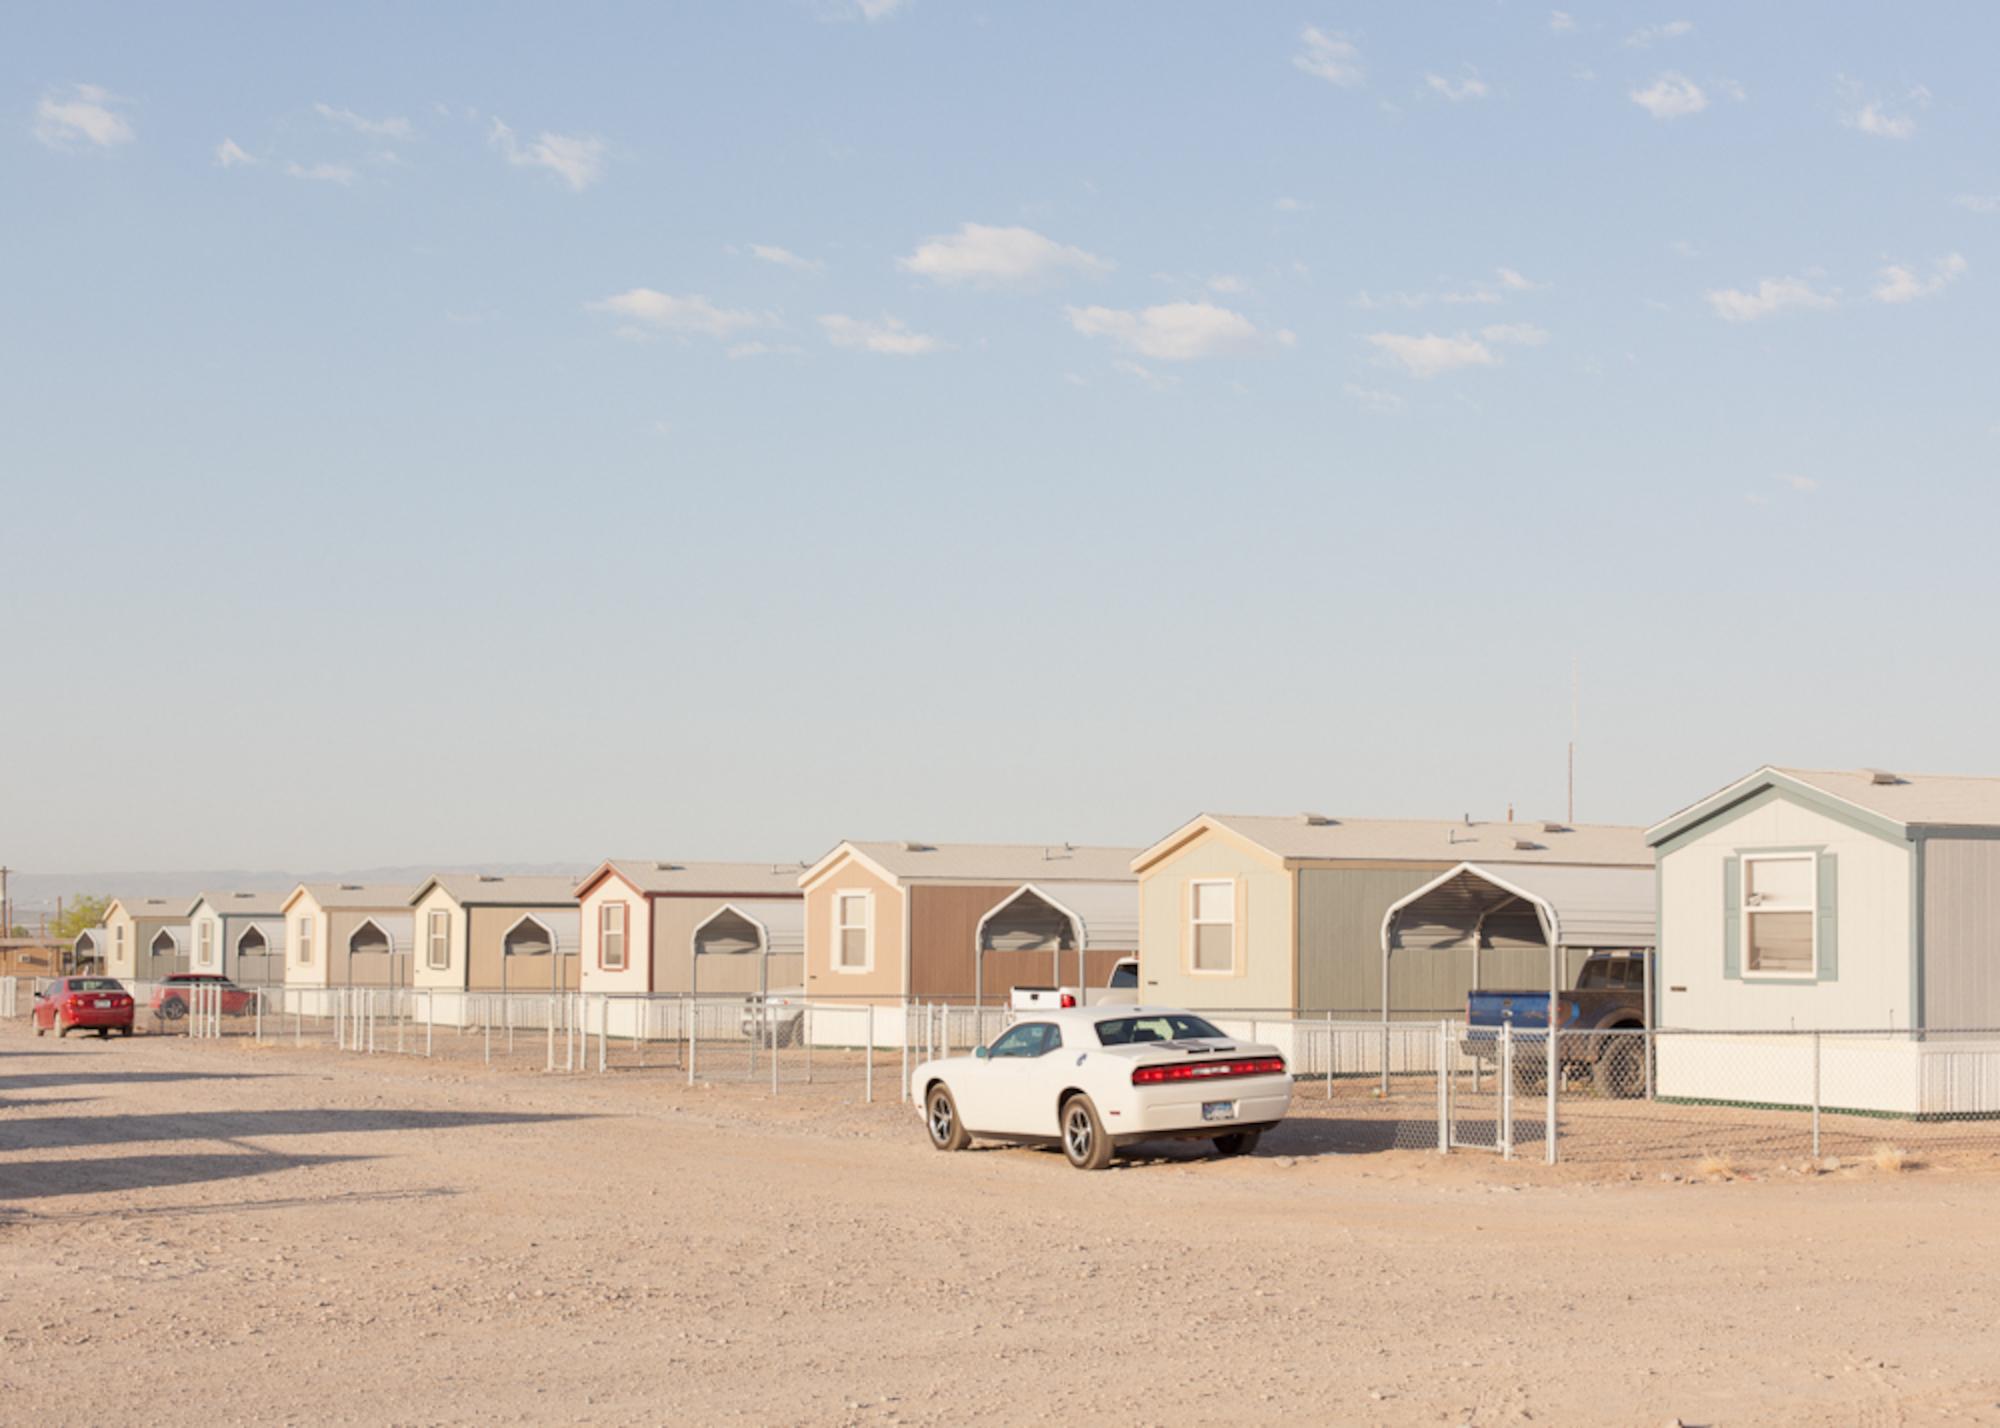 New Border Patrol Government Housing - 21st C. American Landscape Photography